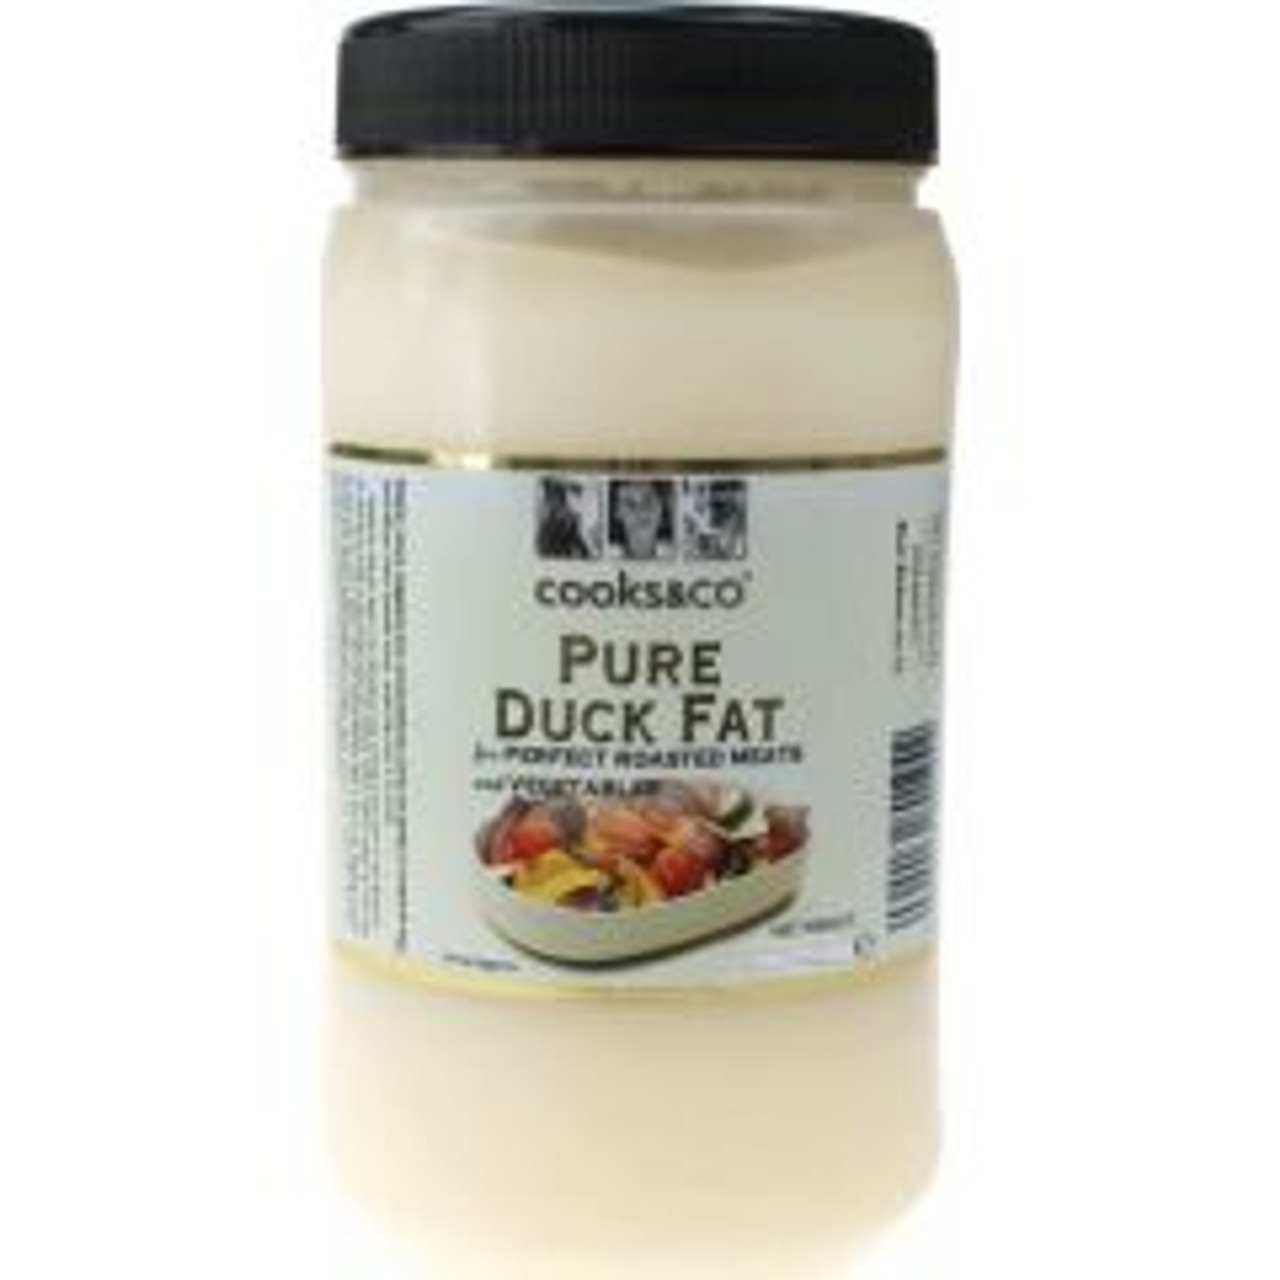 COOKS & CO - DUCK FAT - 850G 